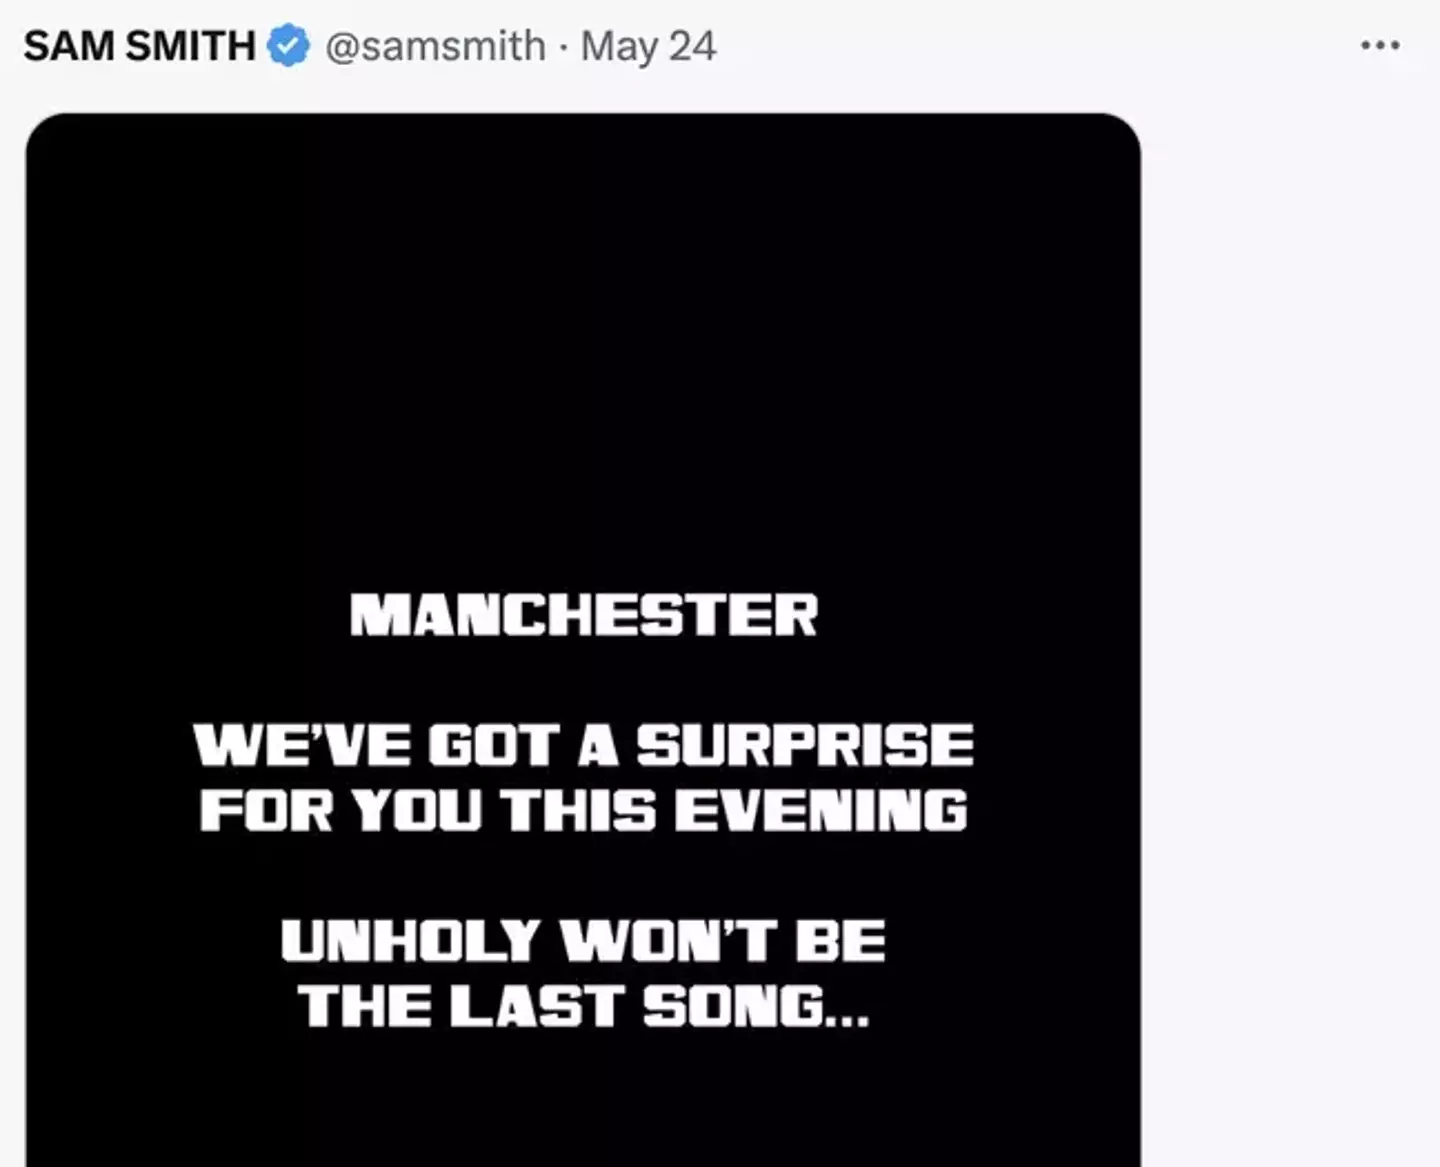 Sam Smith teased the surprise before going on stage.